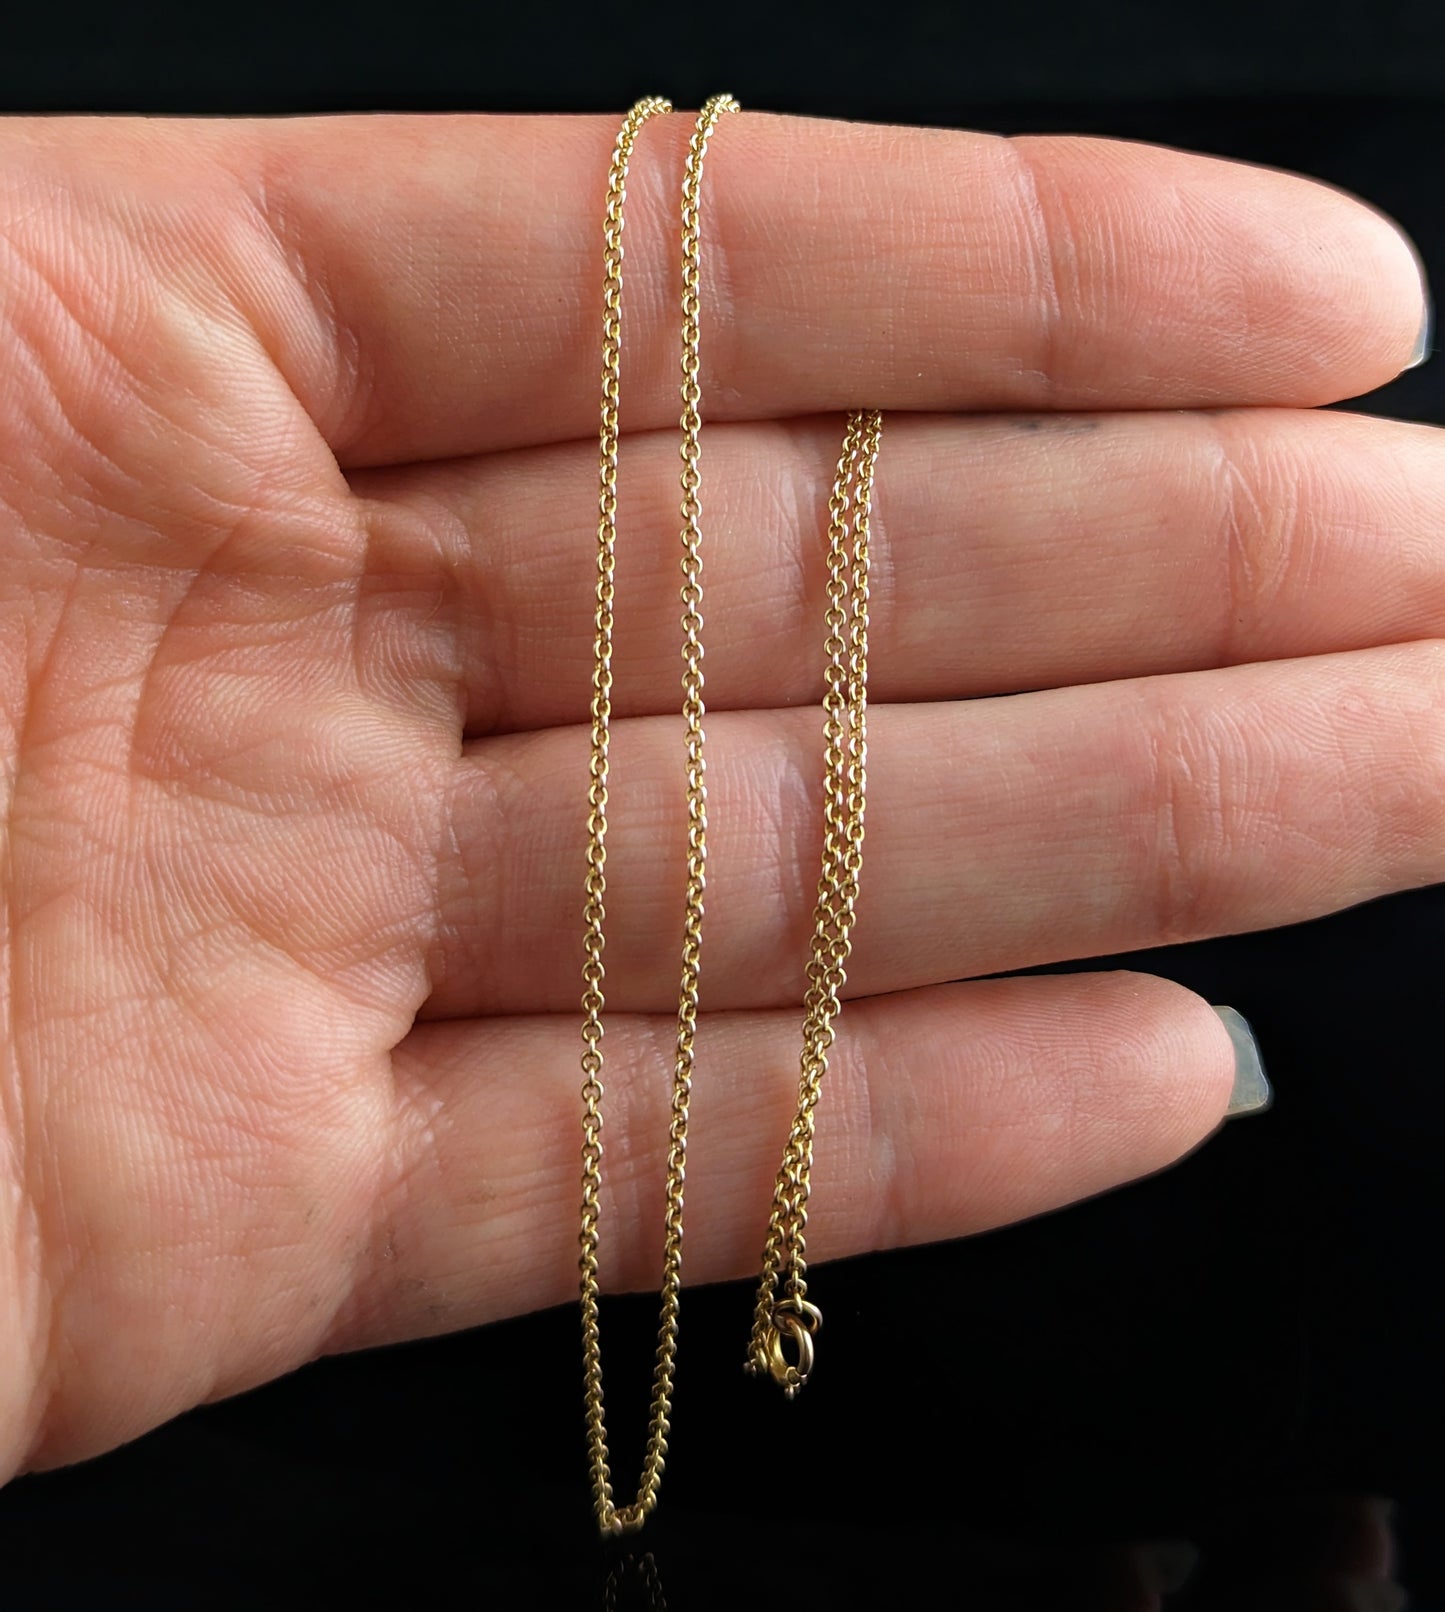 Antique 9ct gold trace link chain necklace, Edwardian, Dainty